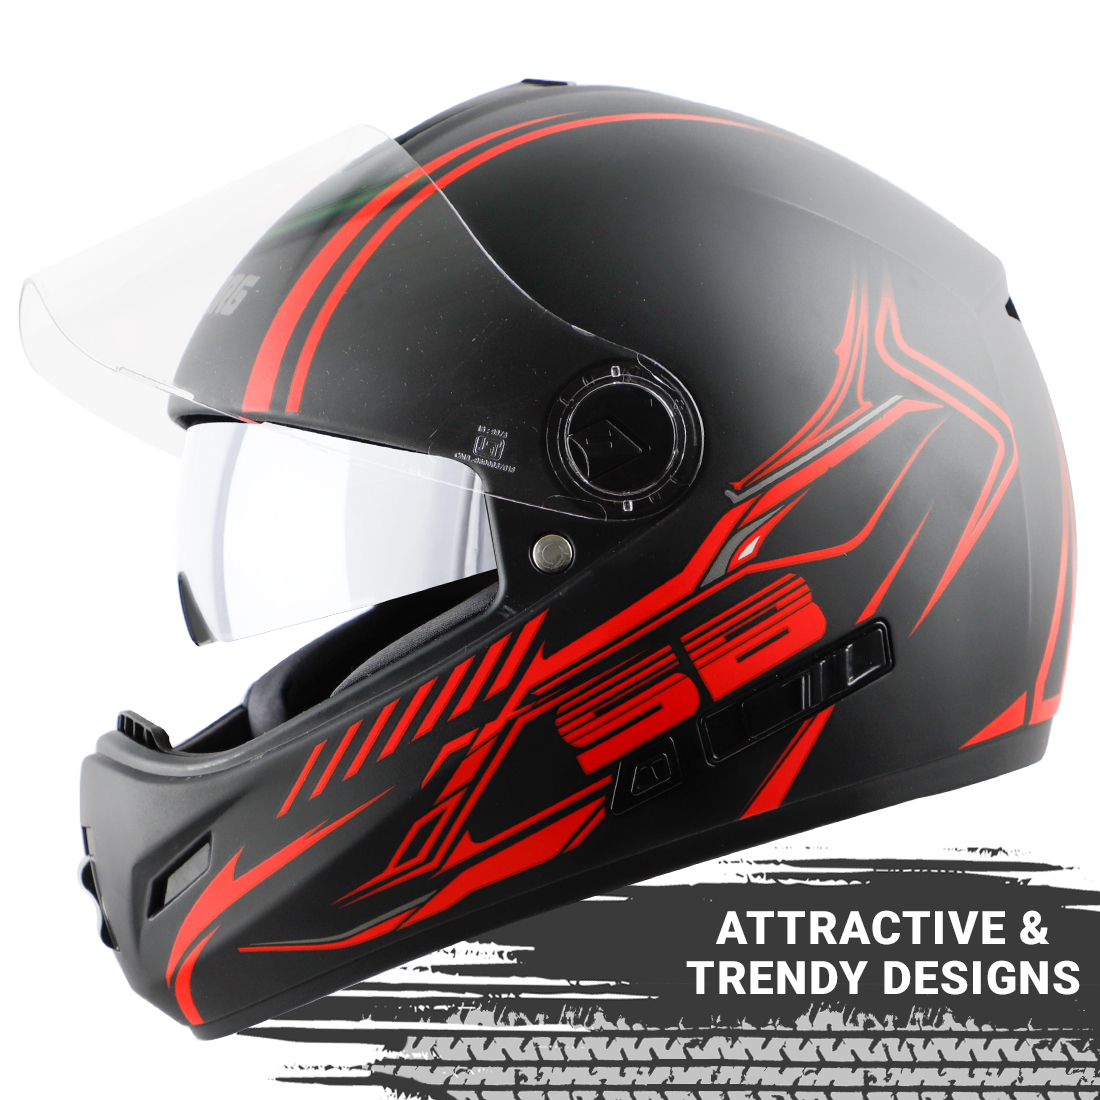 Steelbird Cyborg Cipher Full Face Helmet With Chrome Silver Sun Shield, ISI Certified Helmet (Glossy Black Red)